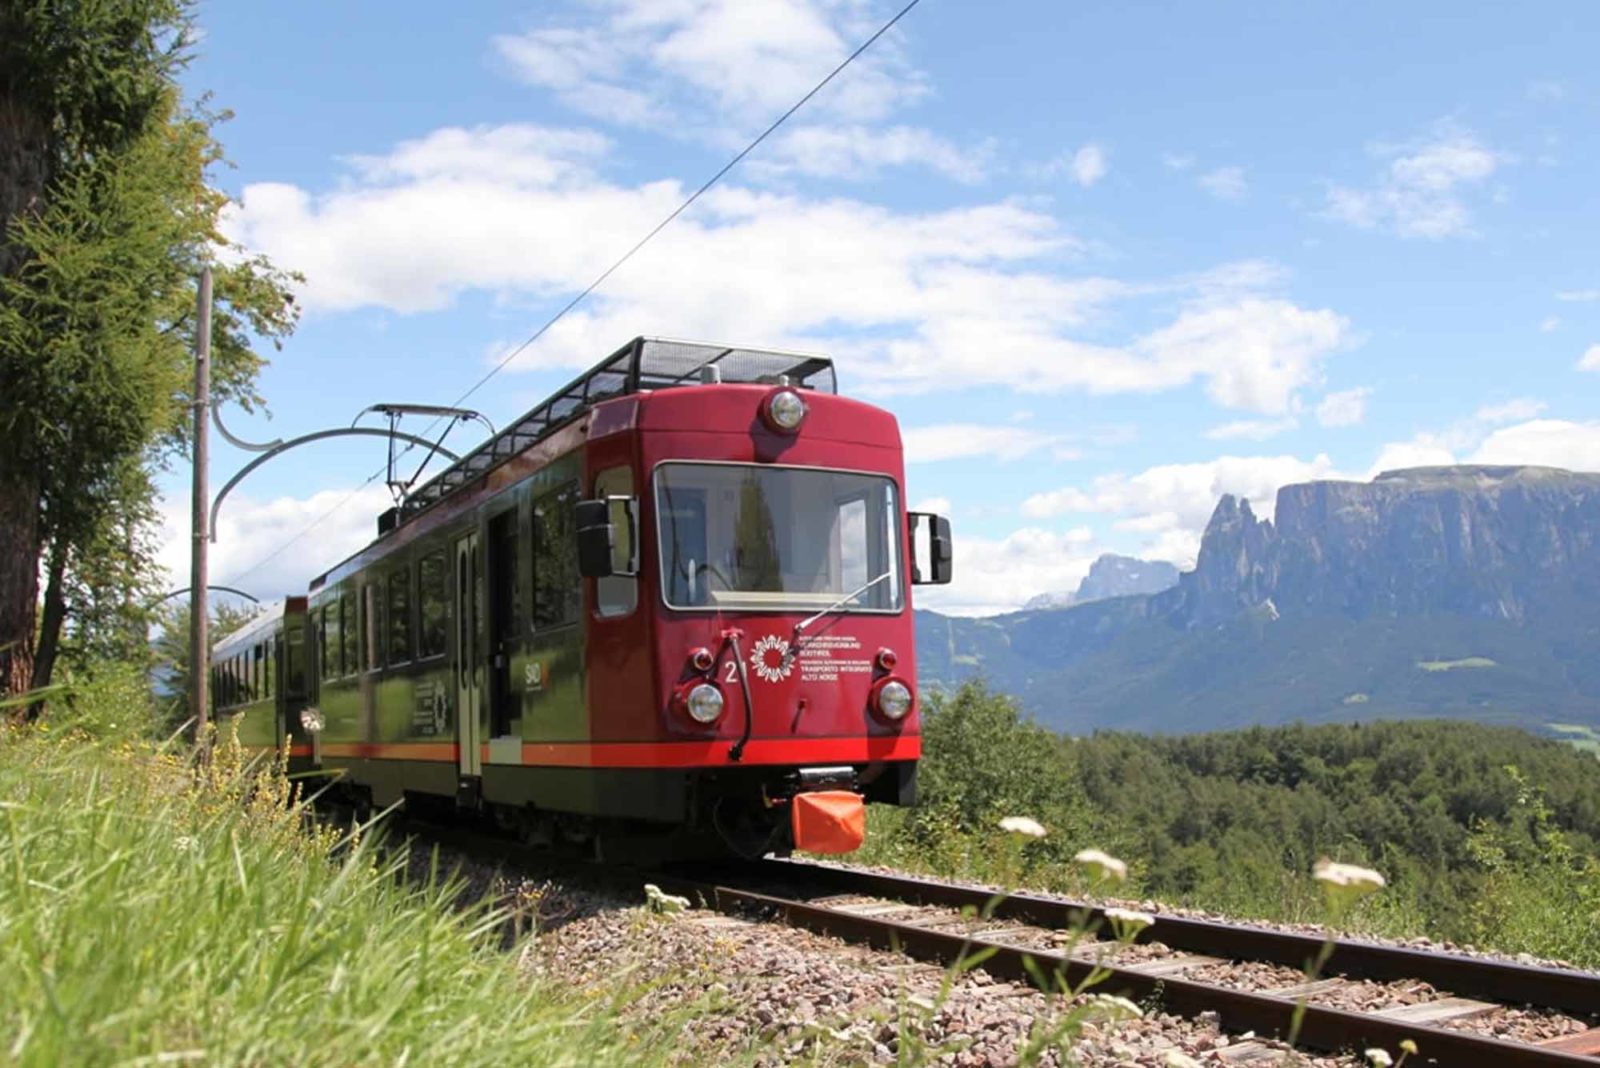 Travel like in the times of emperors: the Rittner narrow gauge railway